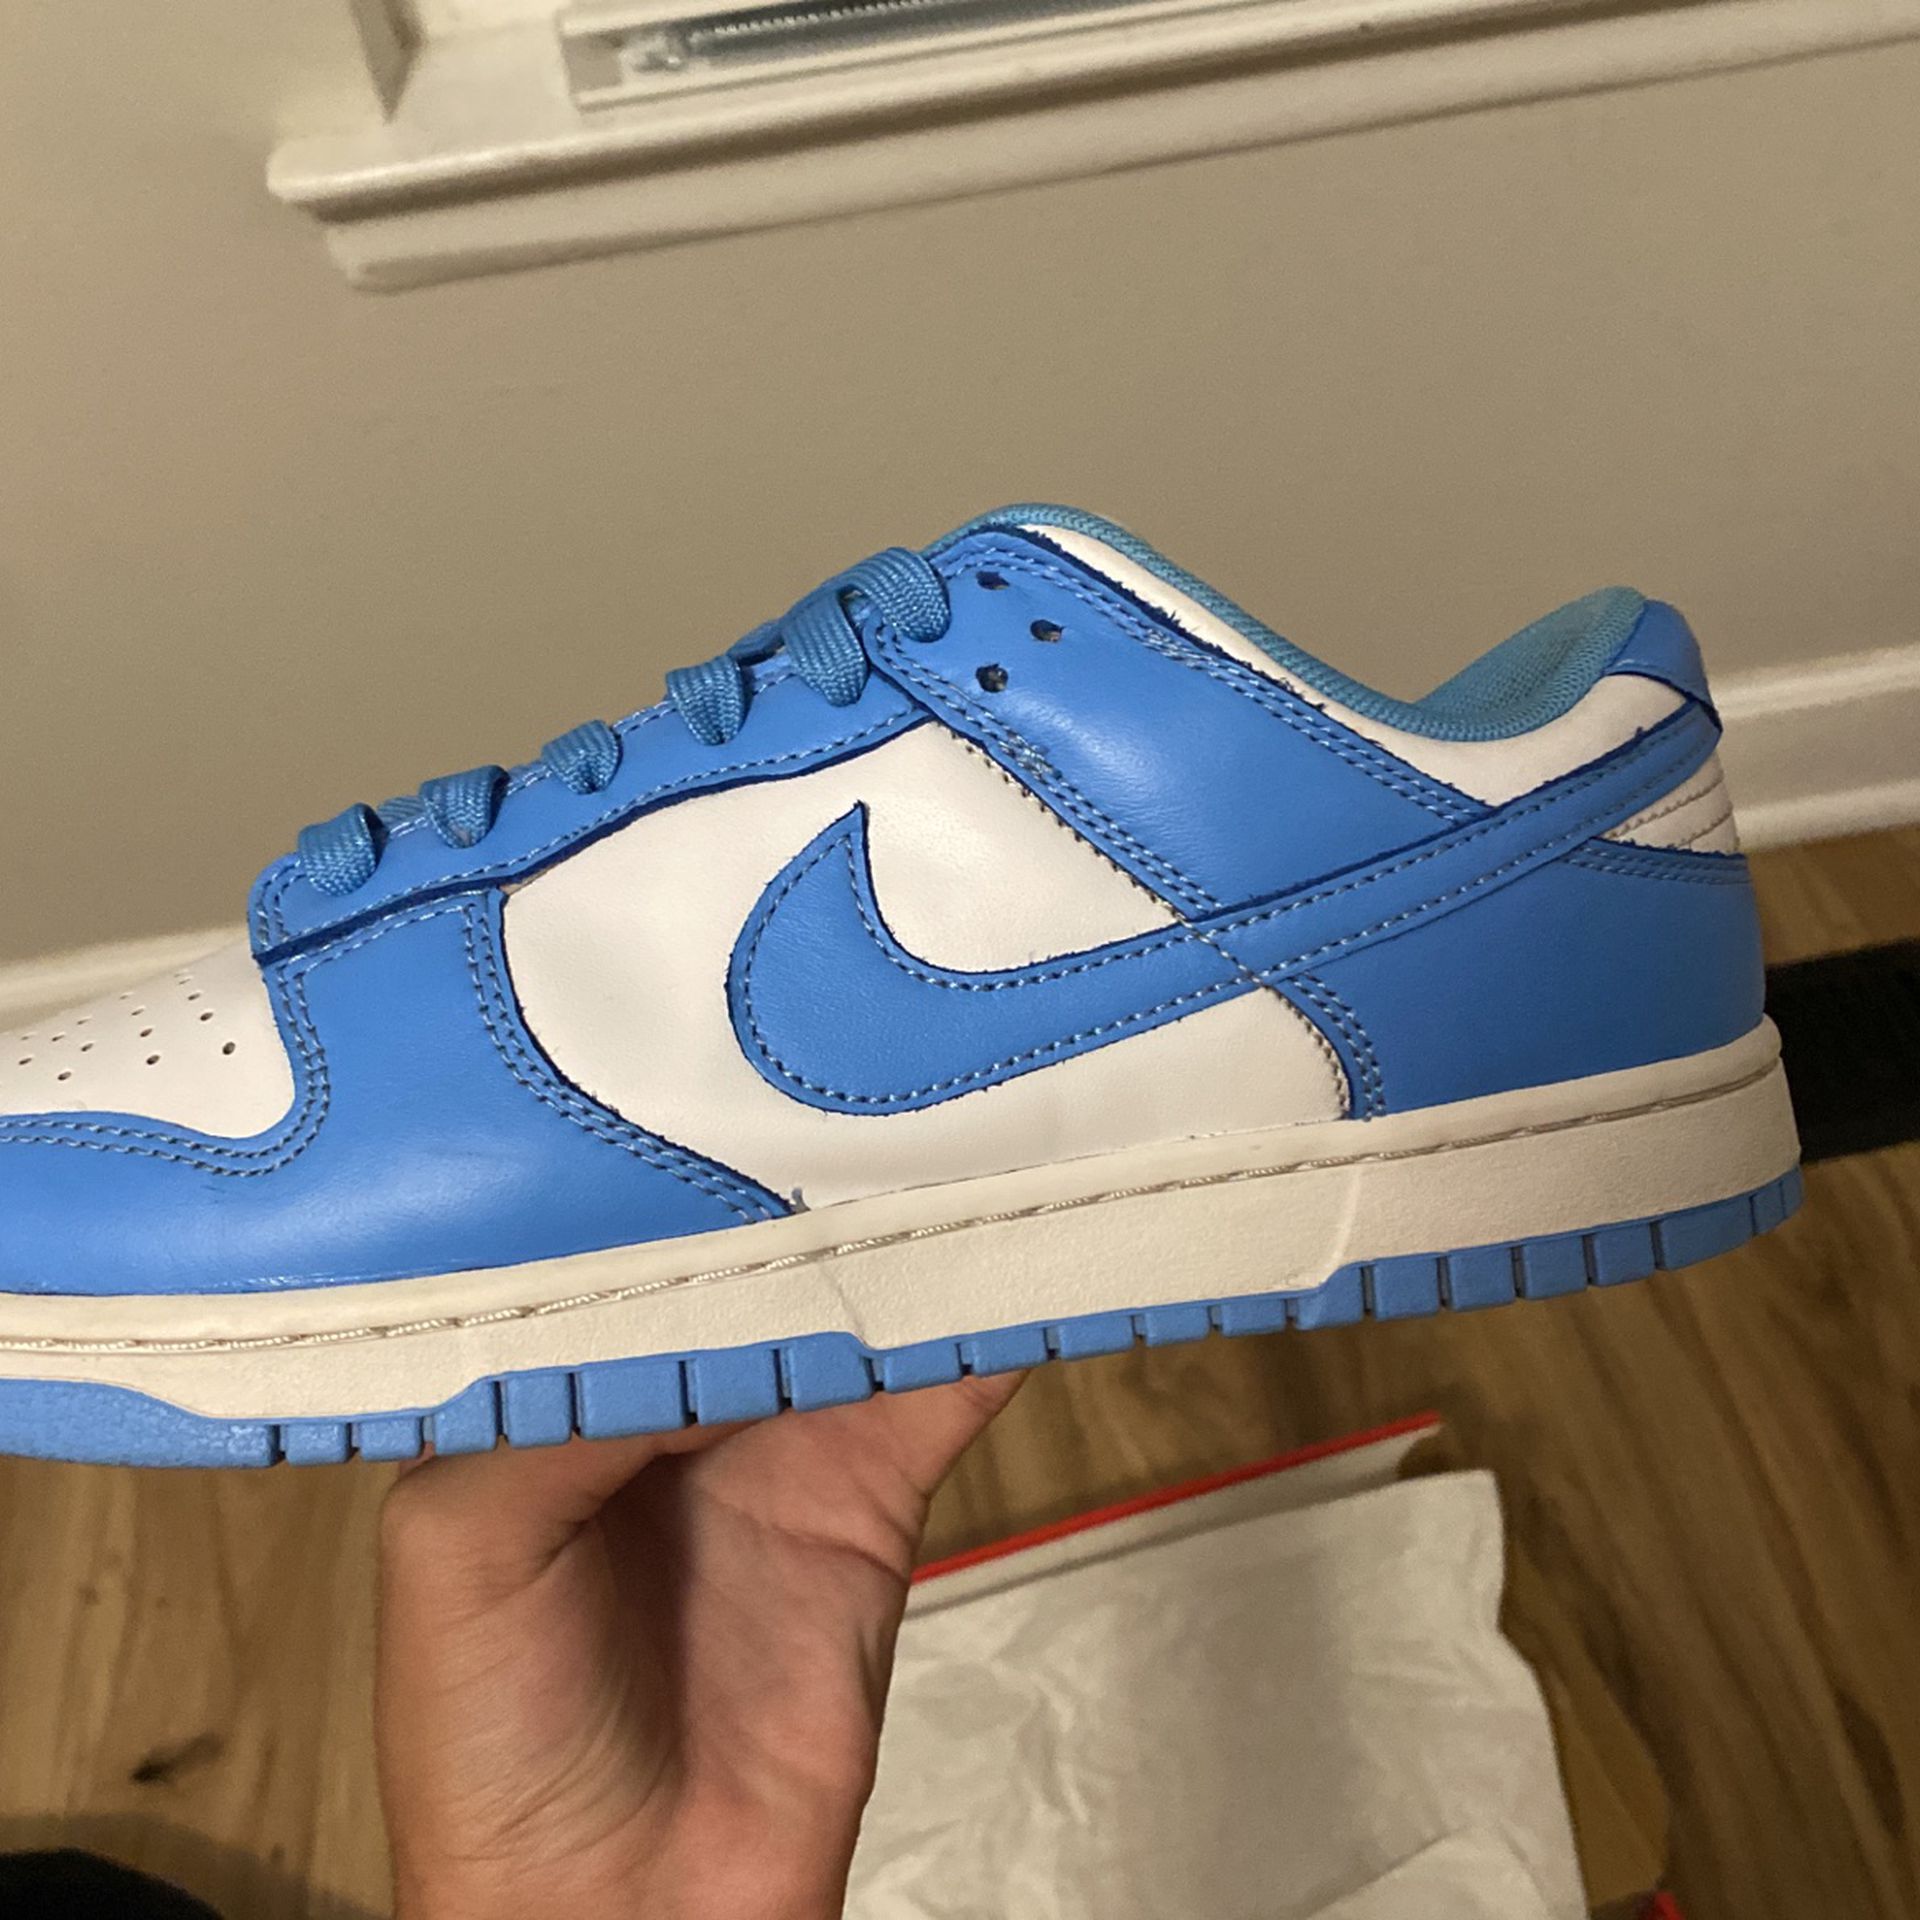 Nike unc dunk lows